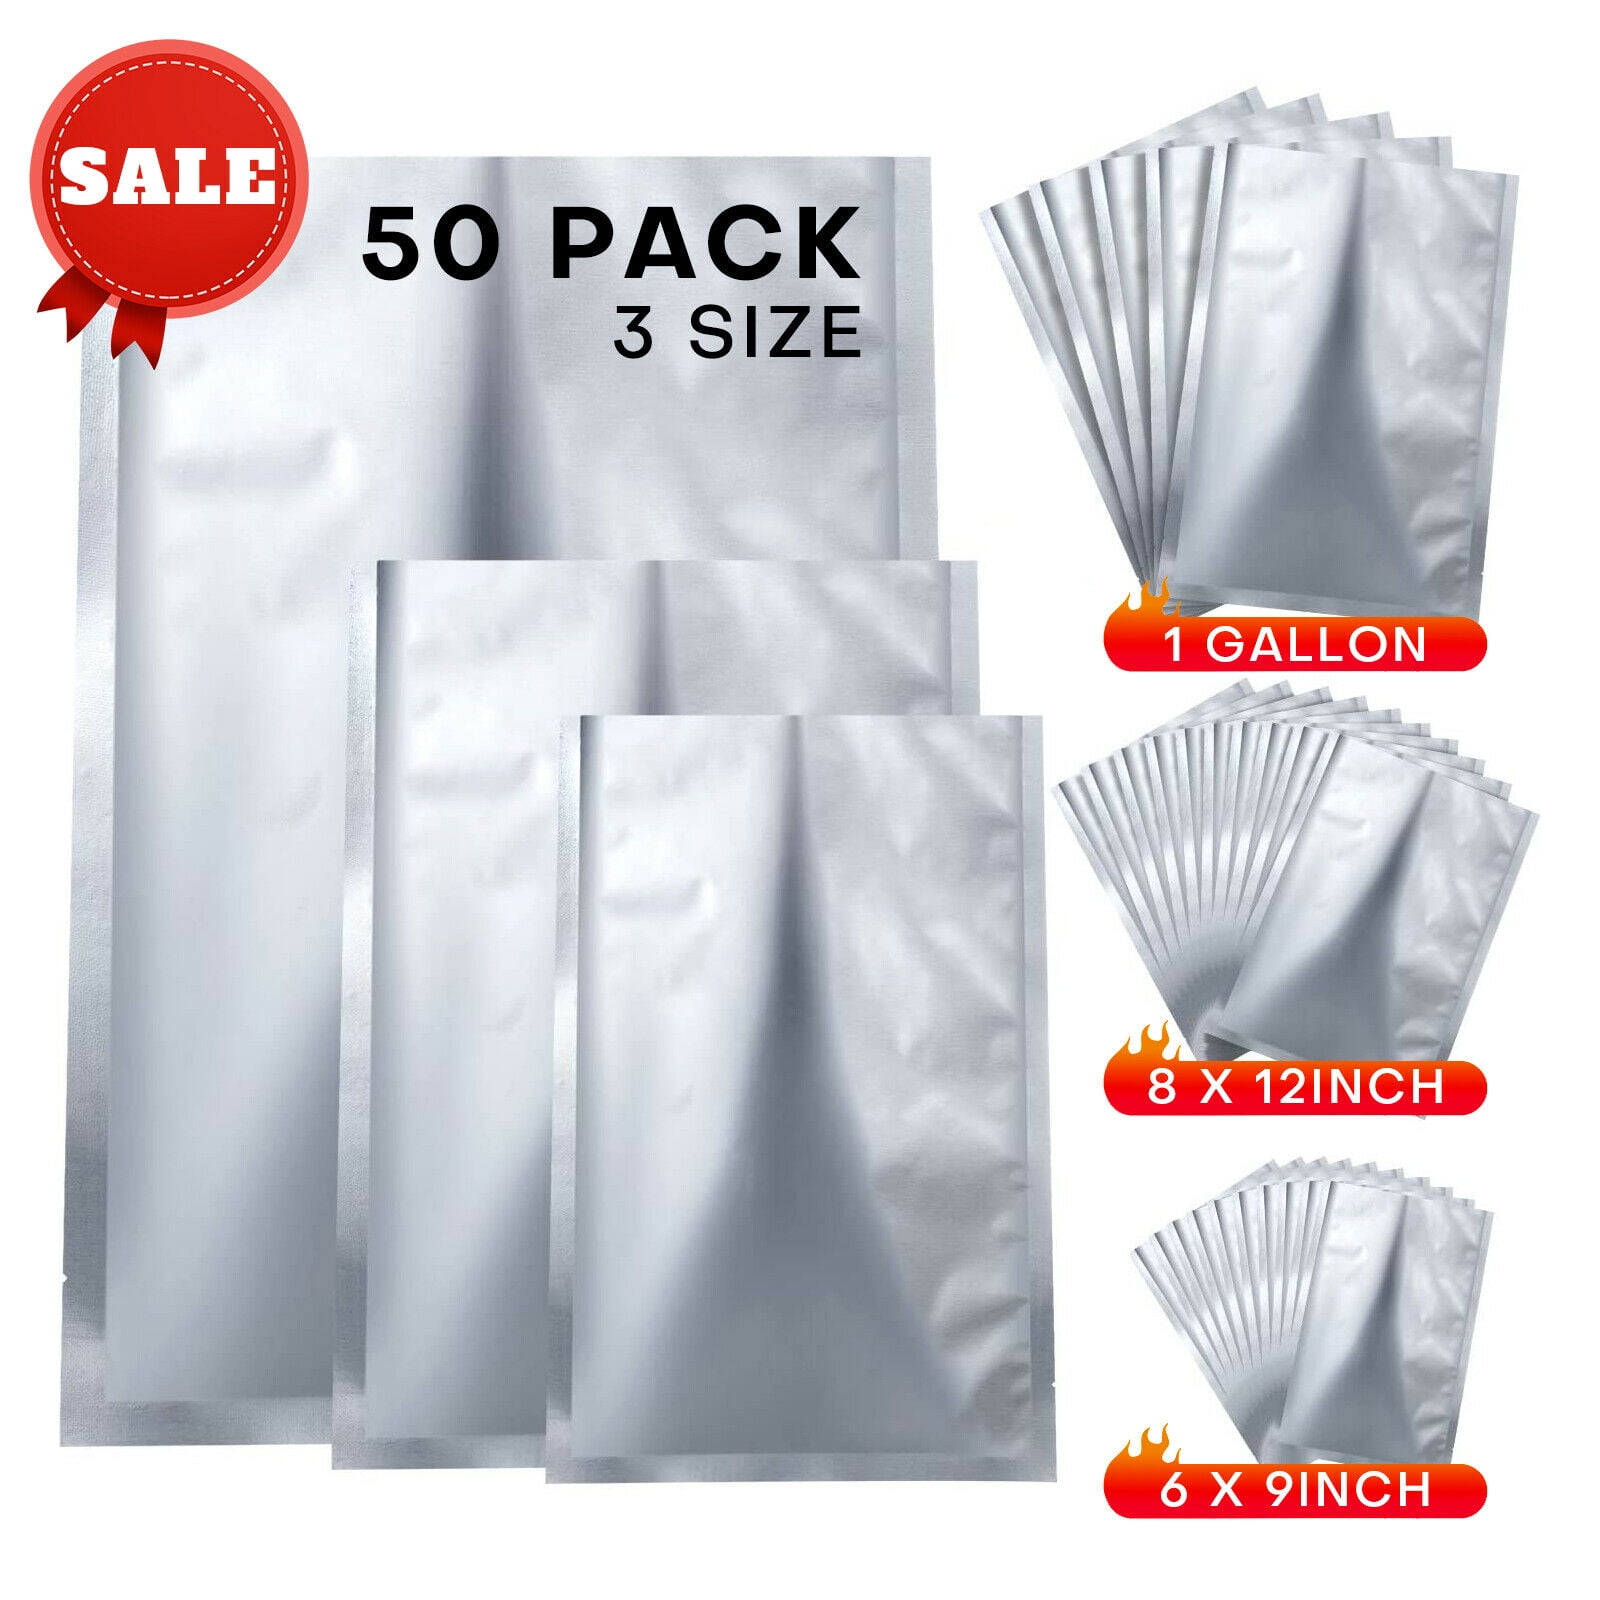 Details about   50pcs Foil Pouch Heat Seal Mylar Smell Proof Coffee and Food Storage Bags 